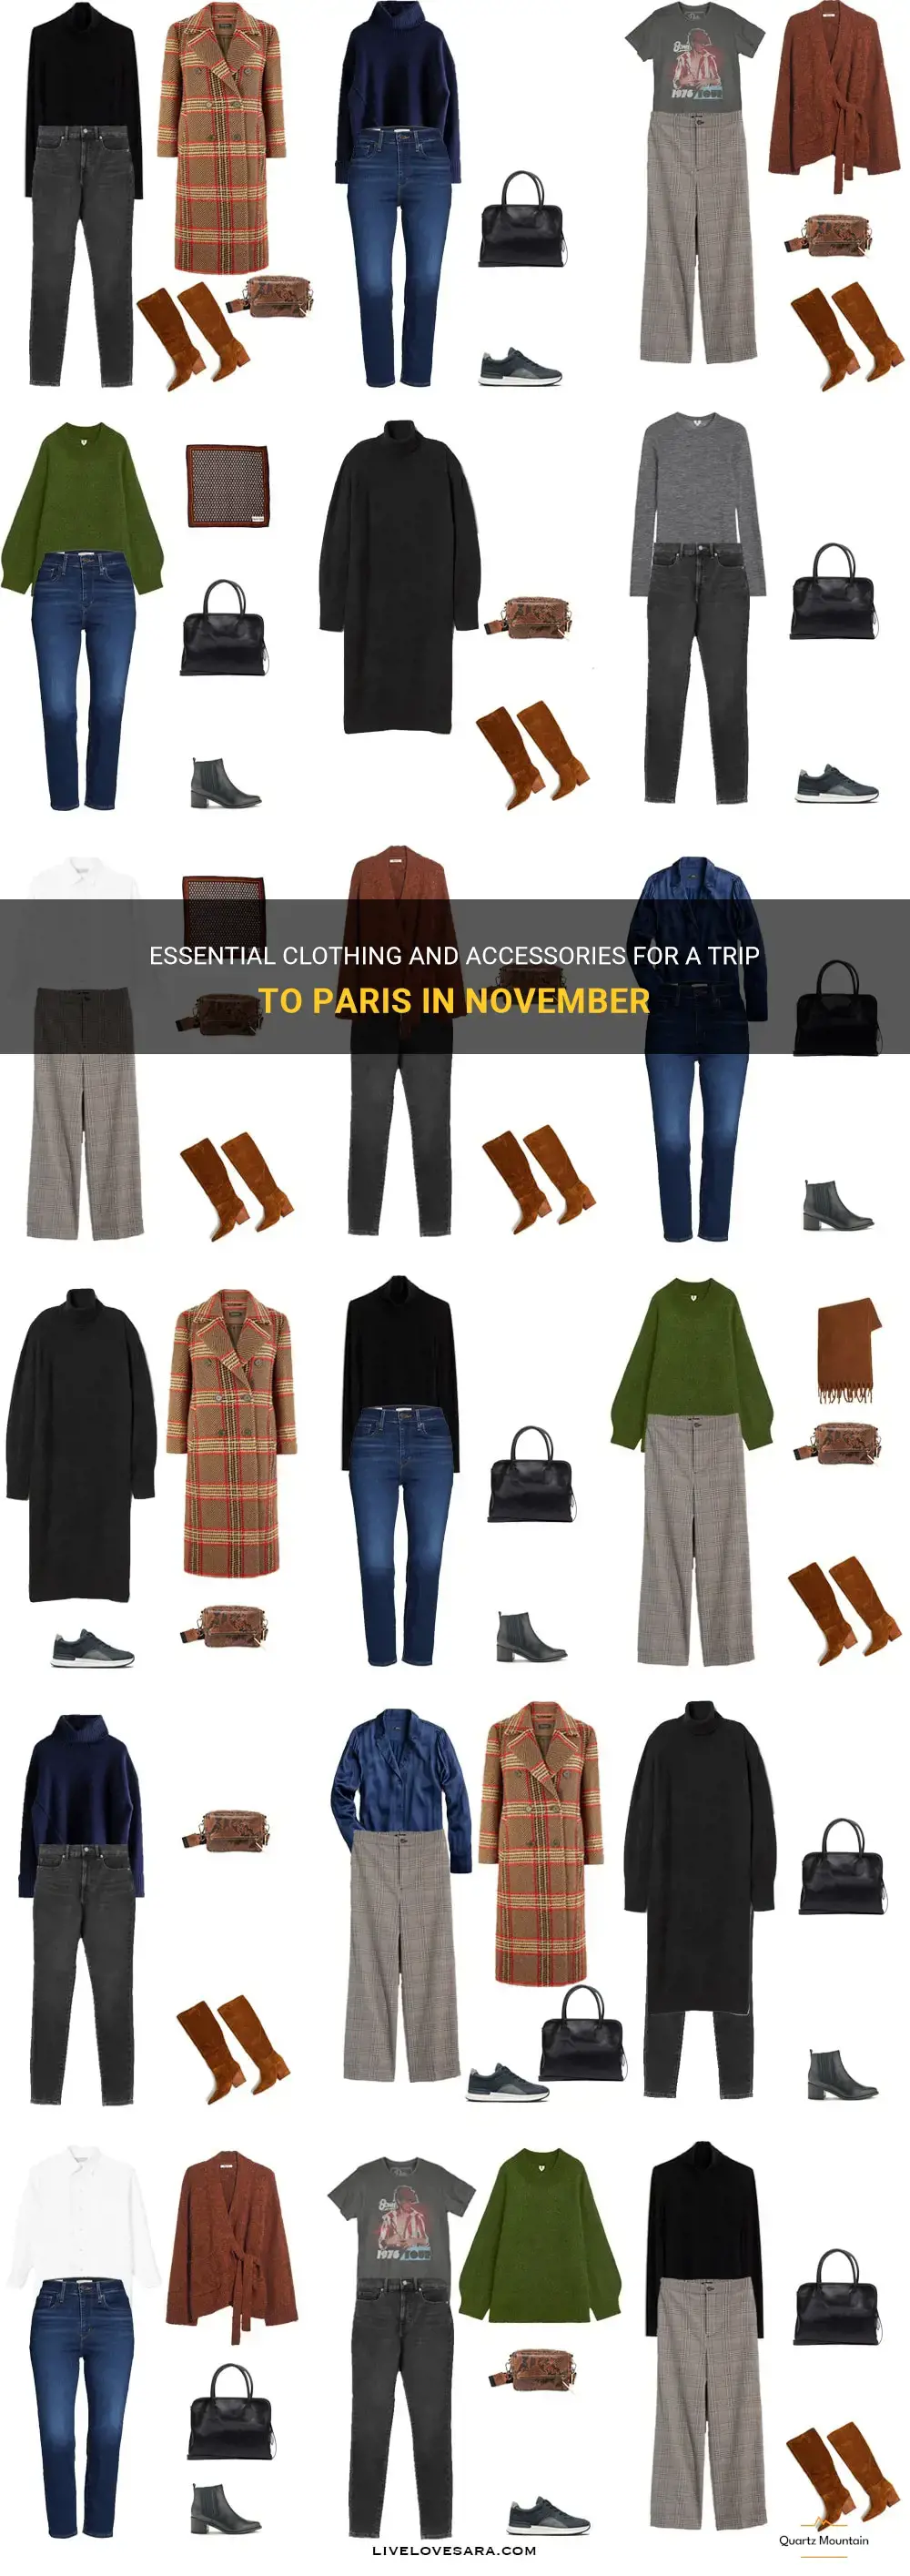 what to pack for trip to paris in november